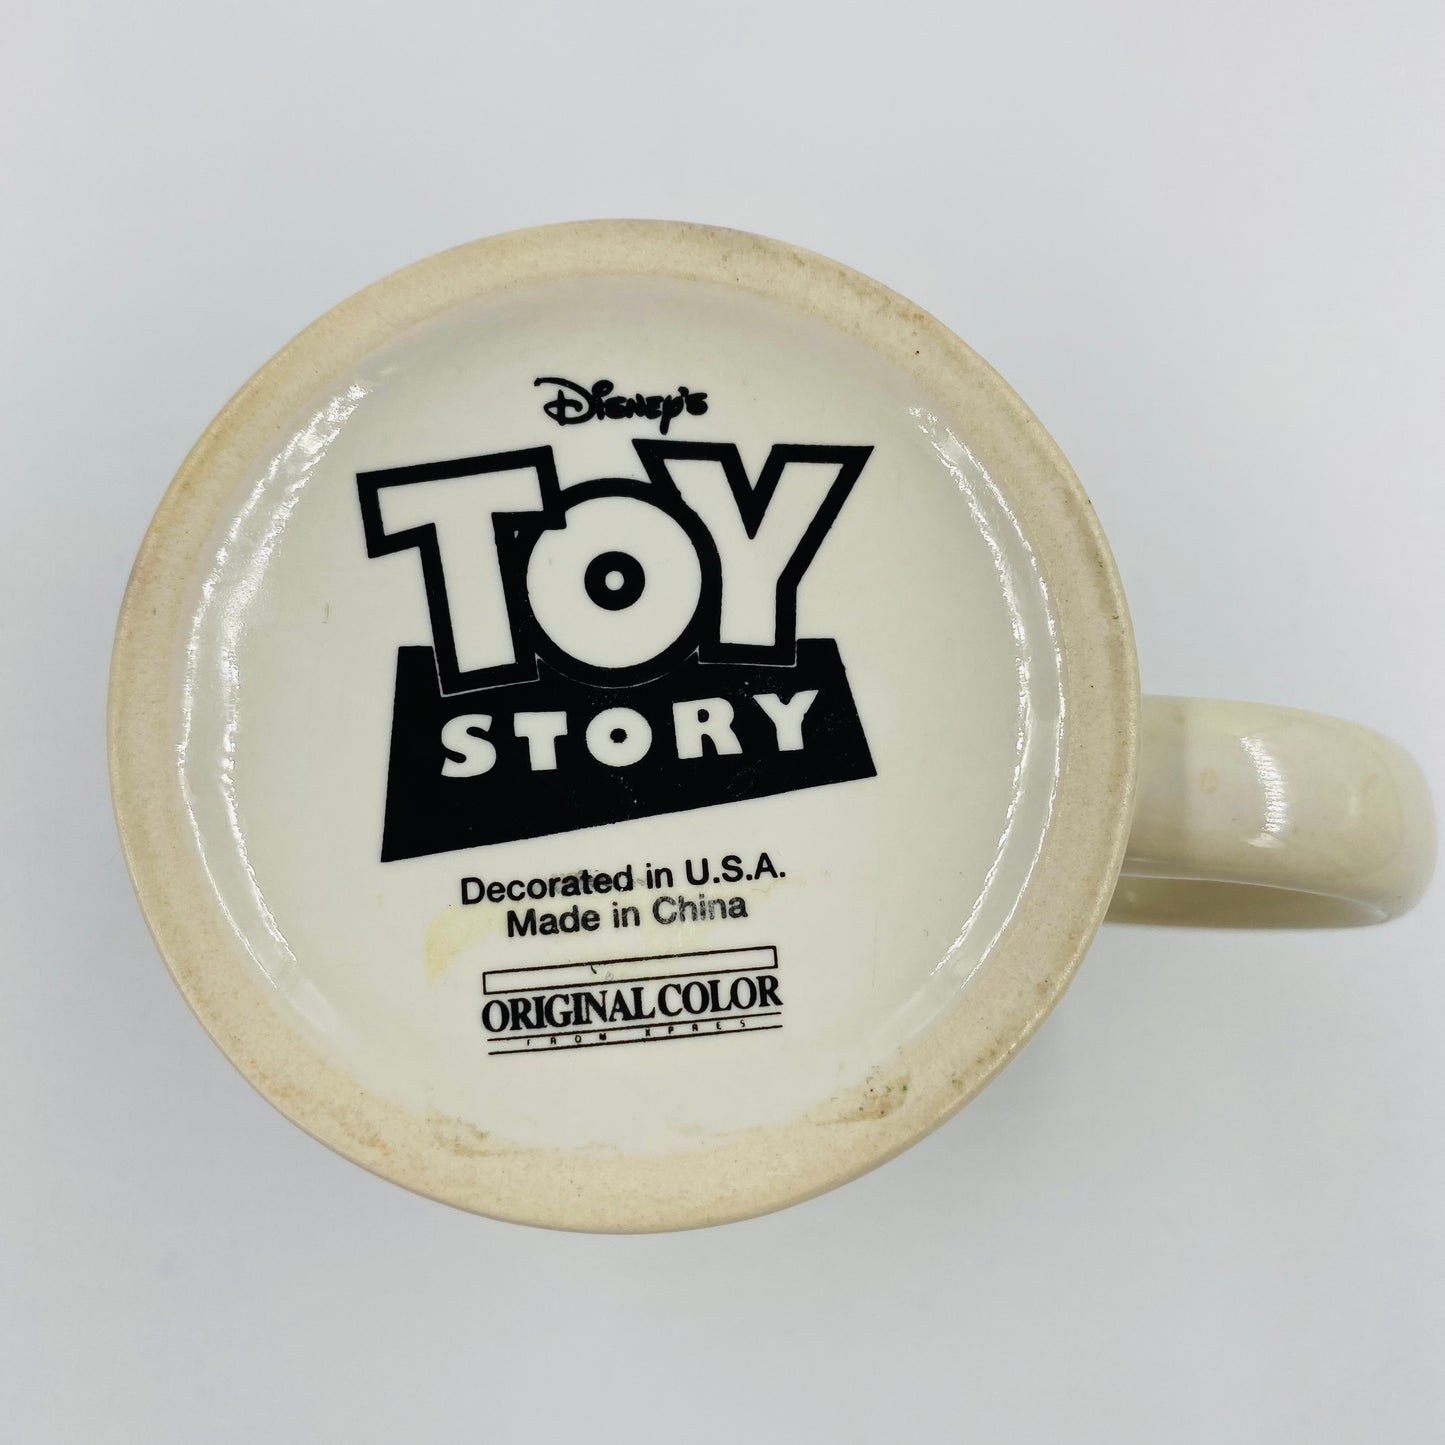 Toy Story “A friendship with some assembly required” mug